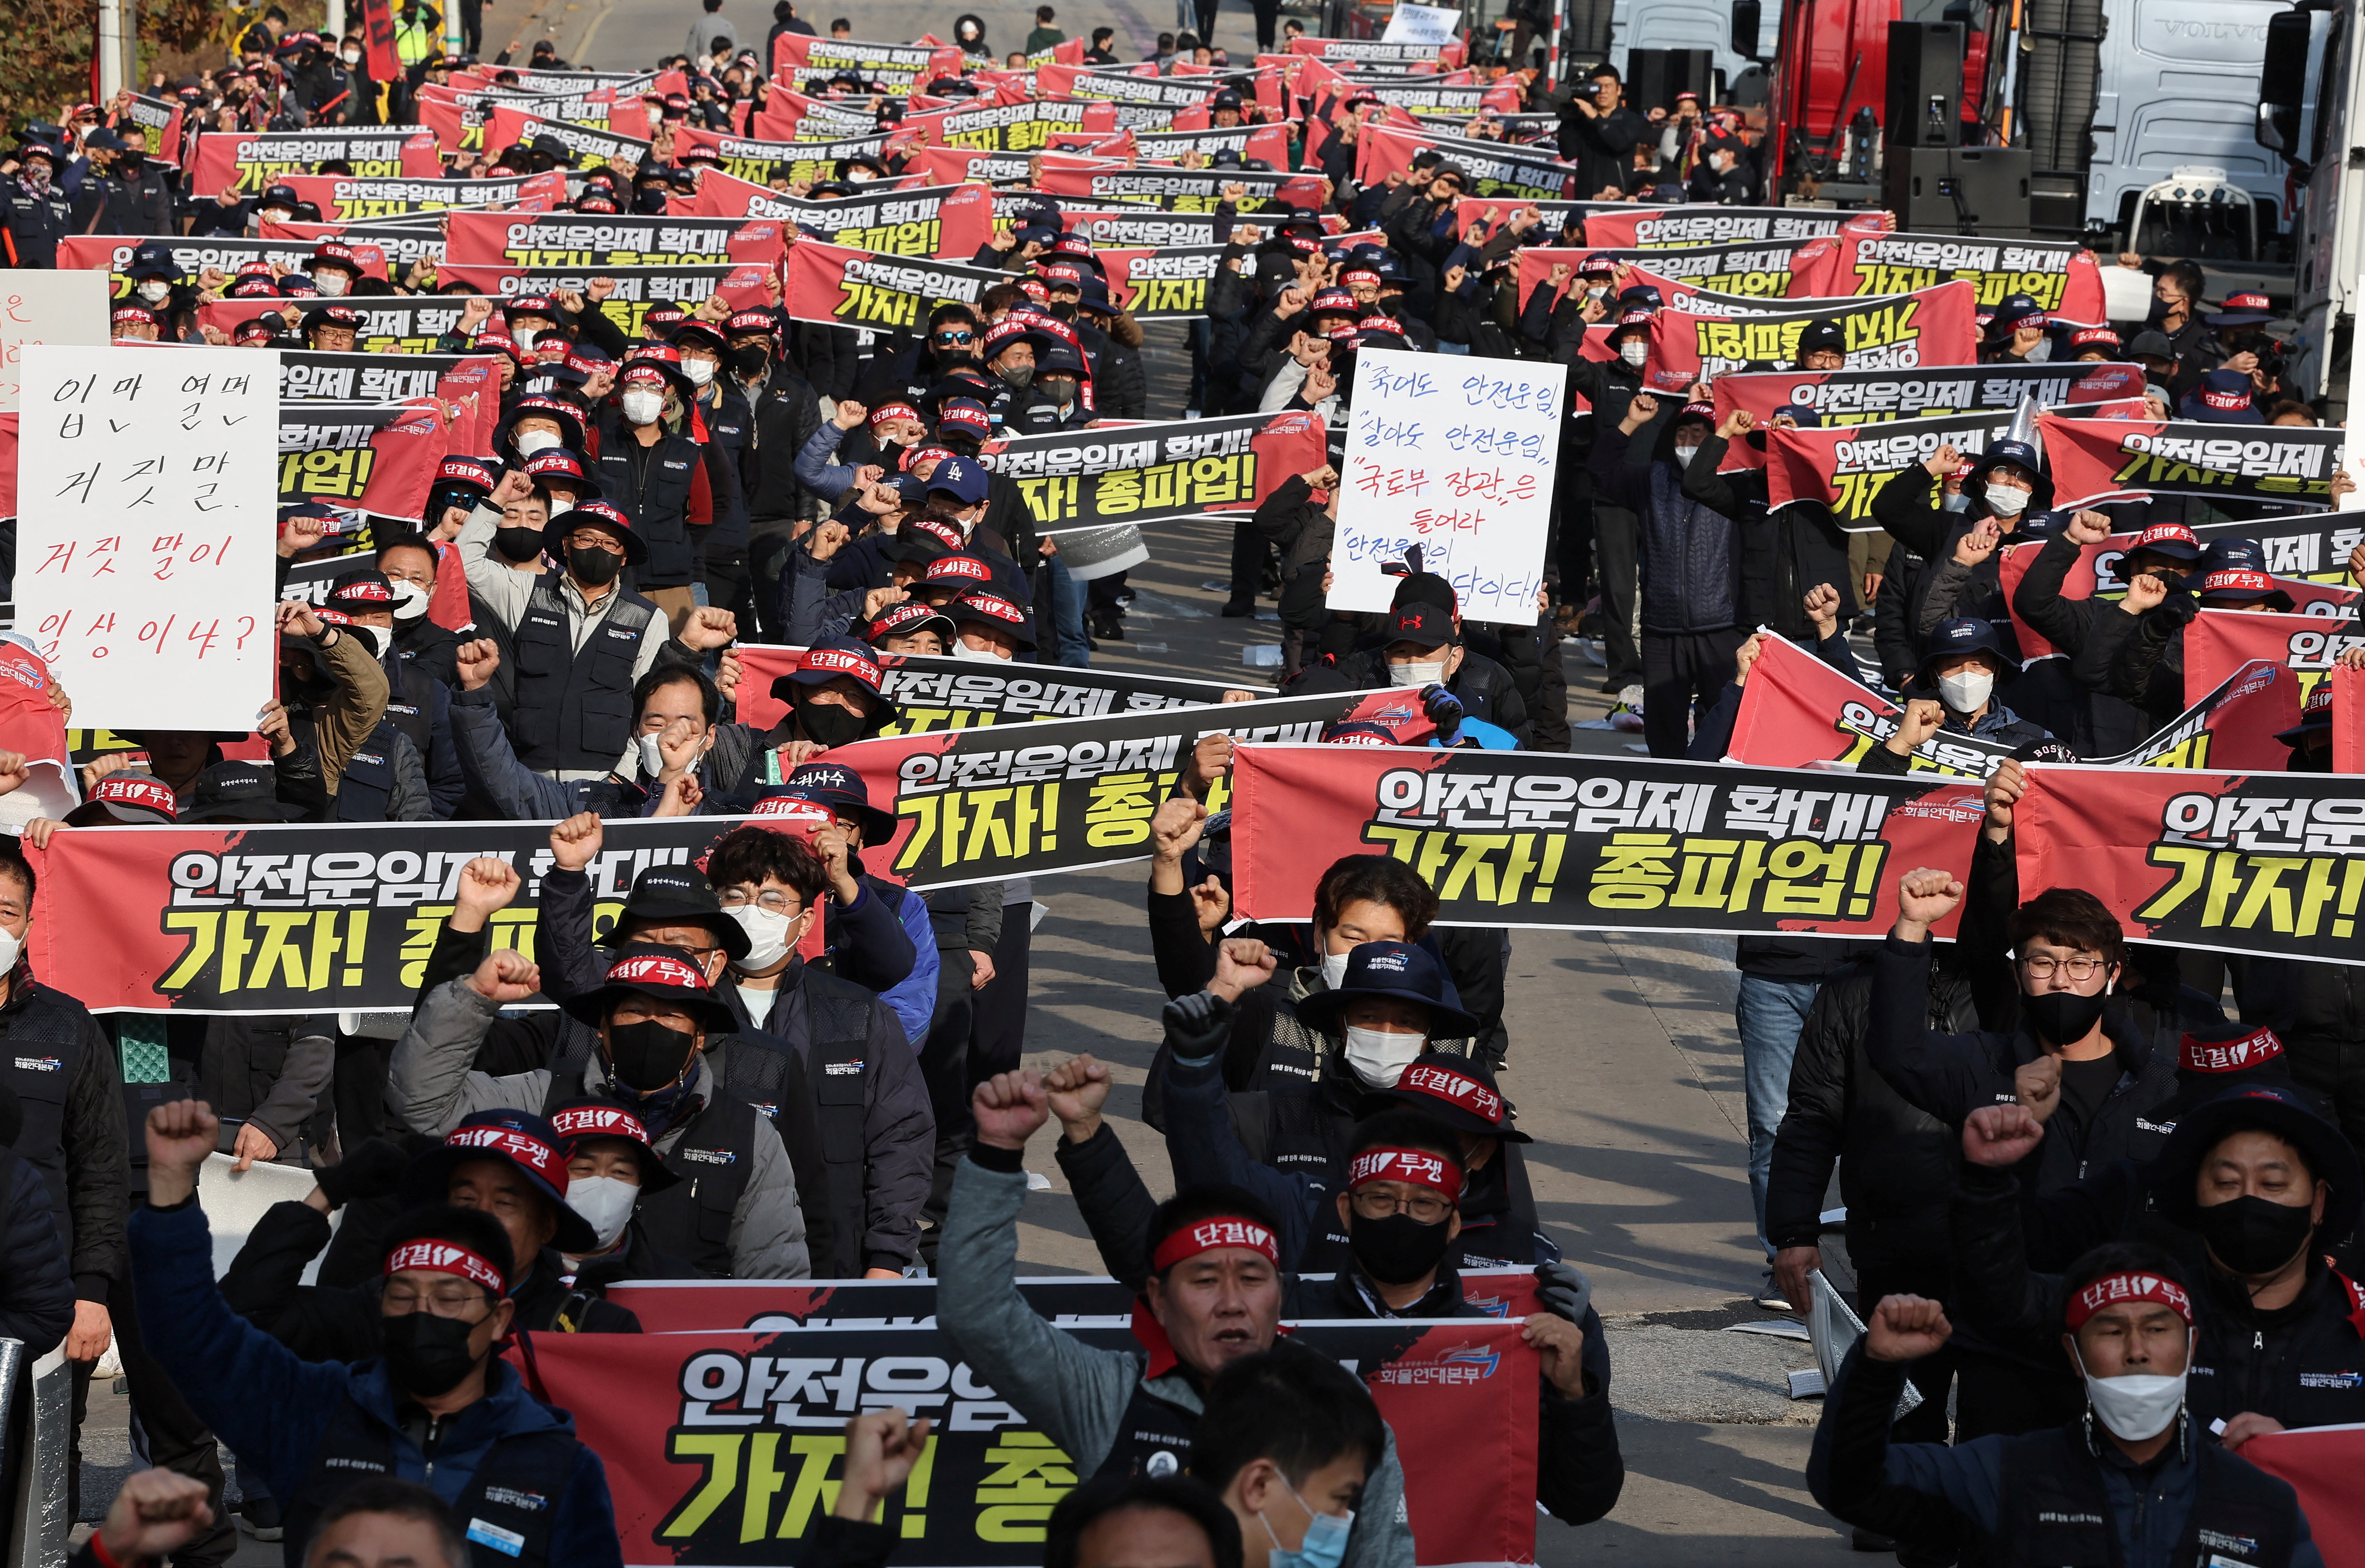 Unionized truckers shout slogans during their rally as they kick off their strike in front of transport hub in Uiwang